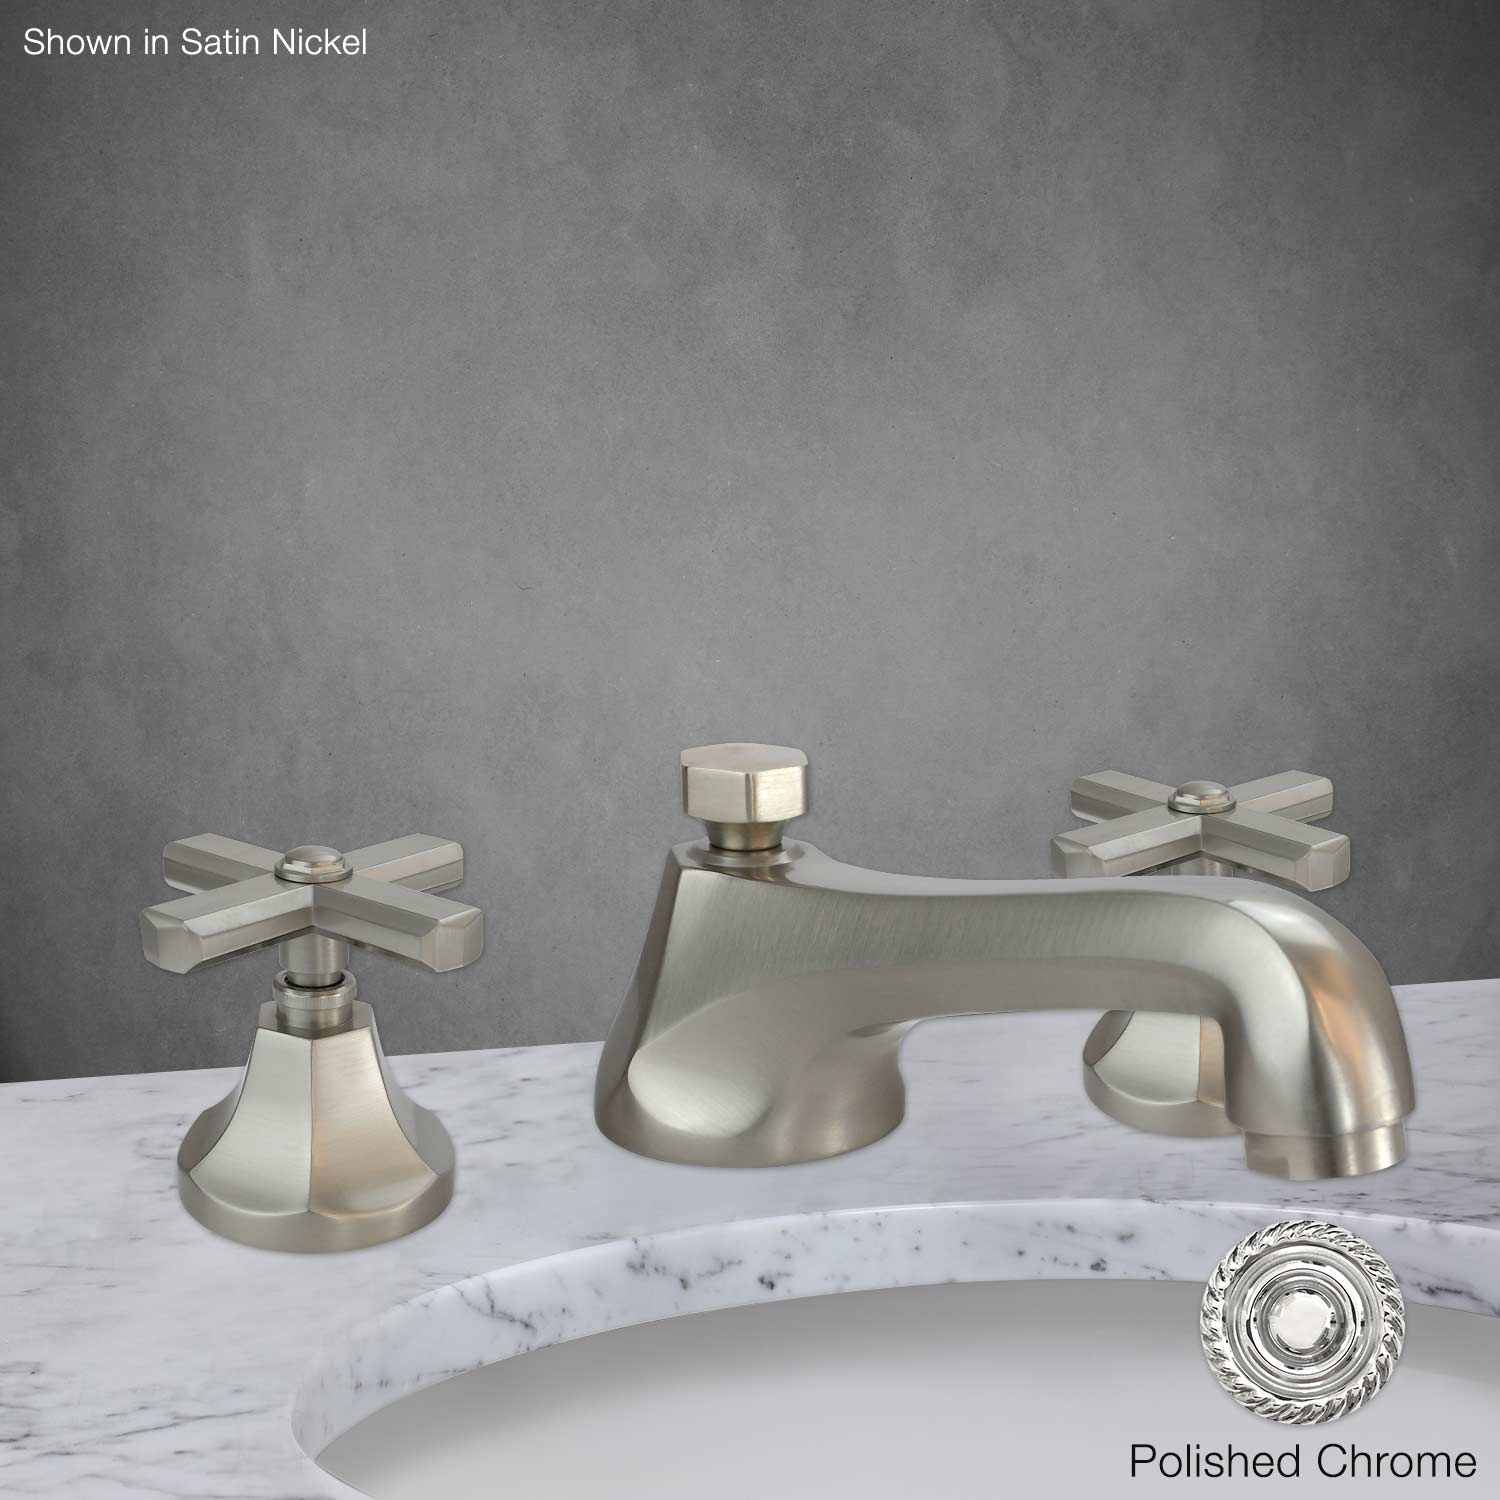 Merano Widespread Lavatory Faucet with Cross Handle in Polished Chrome